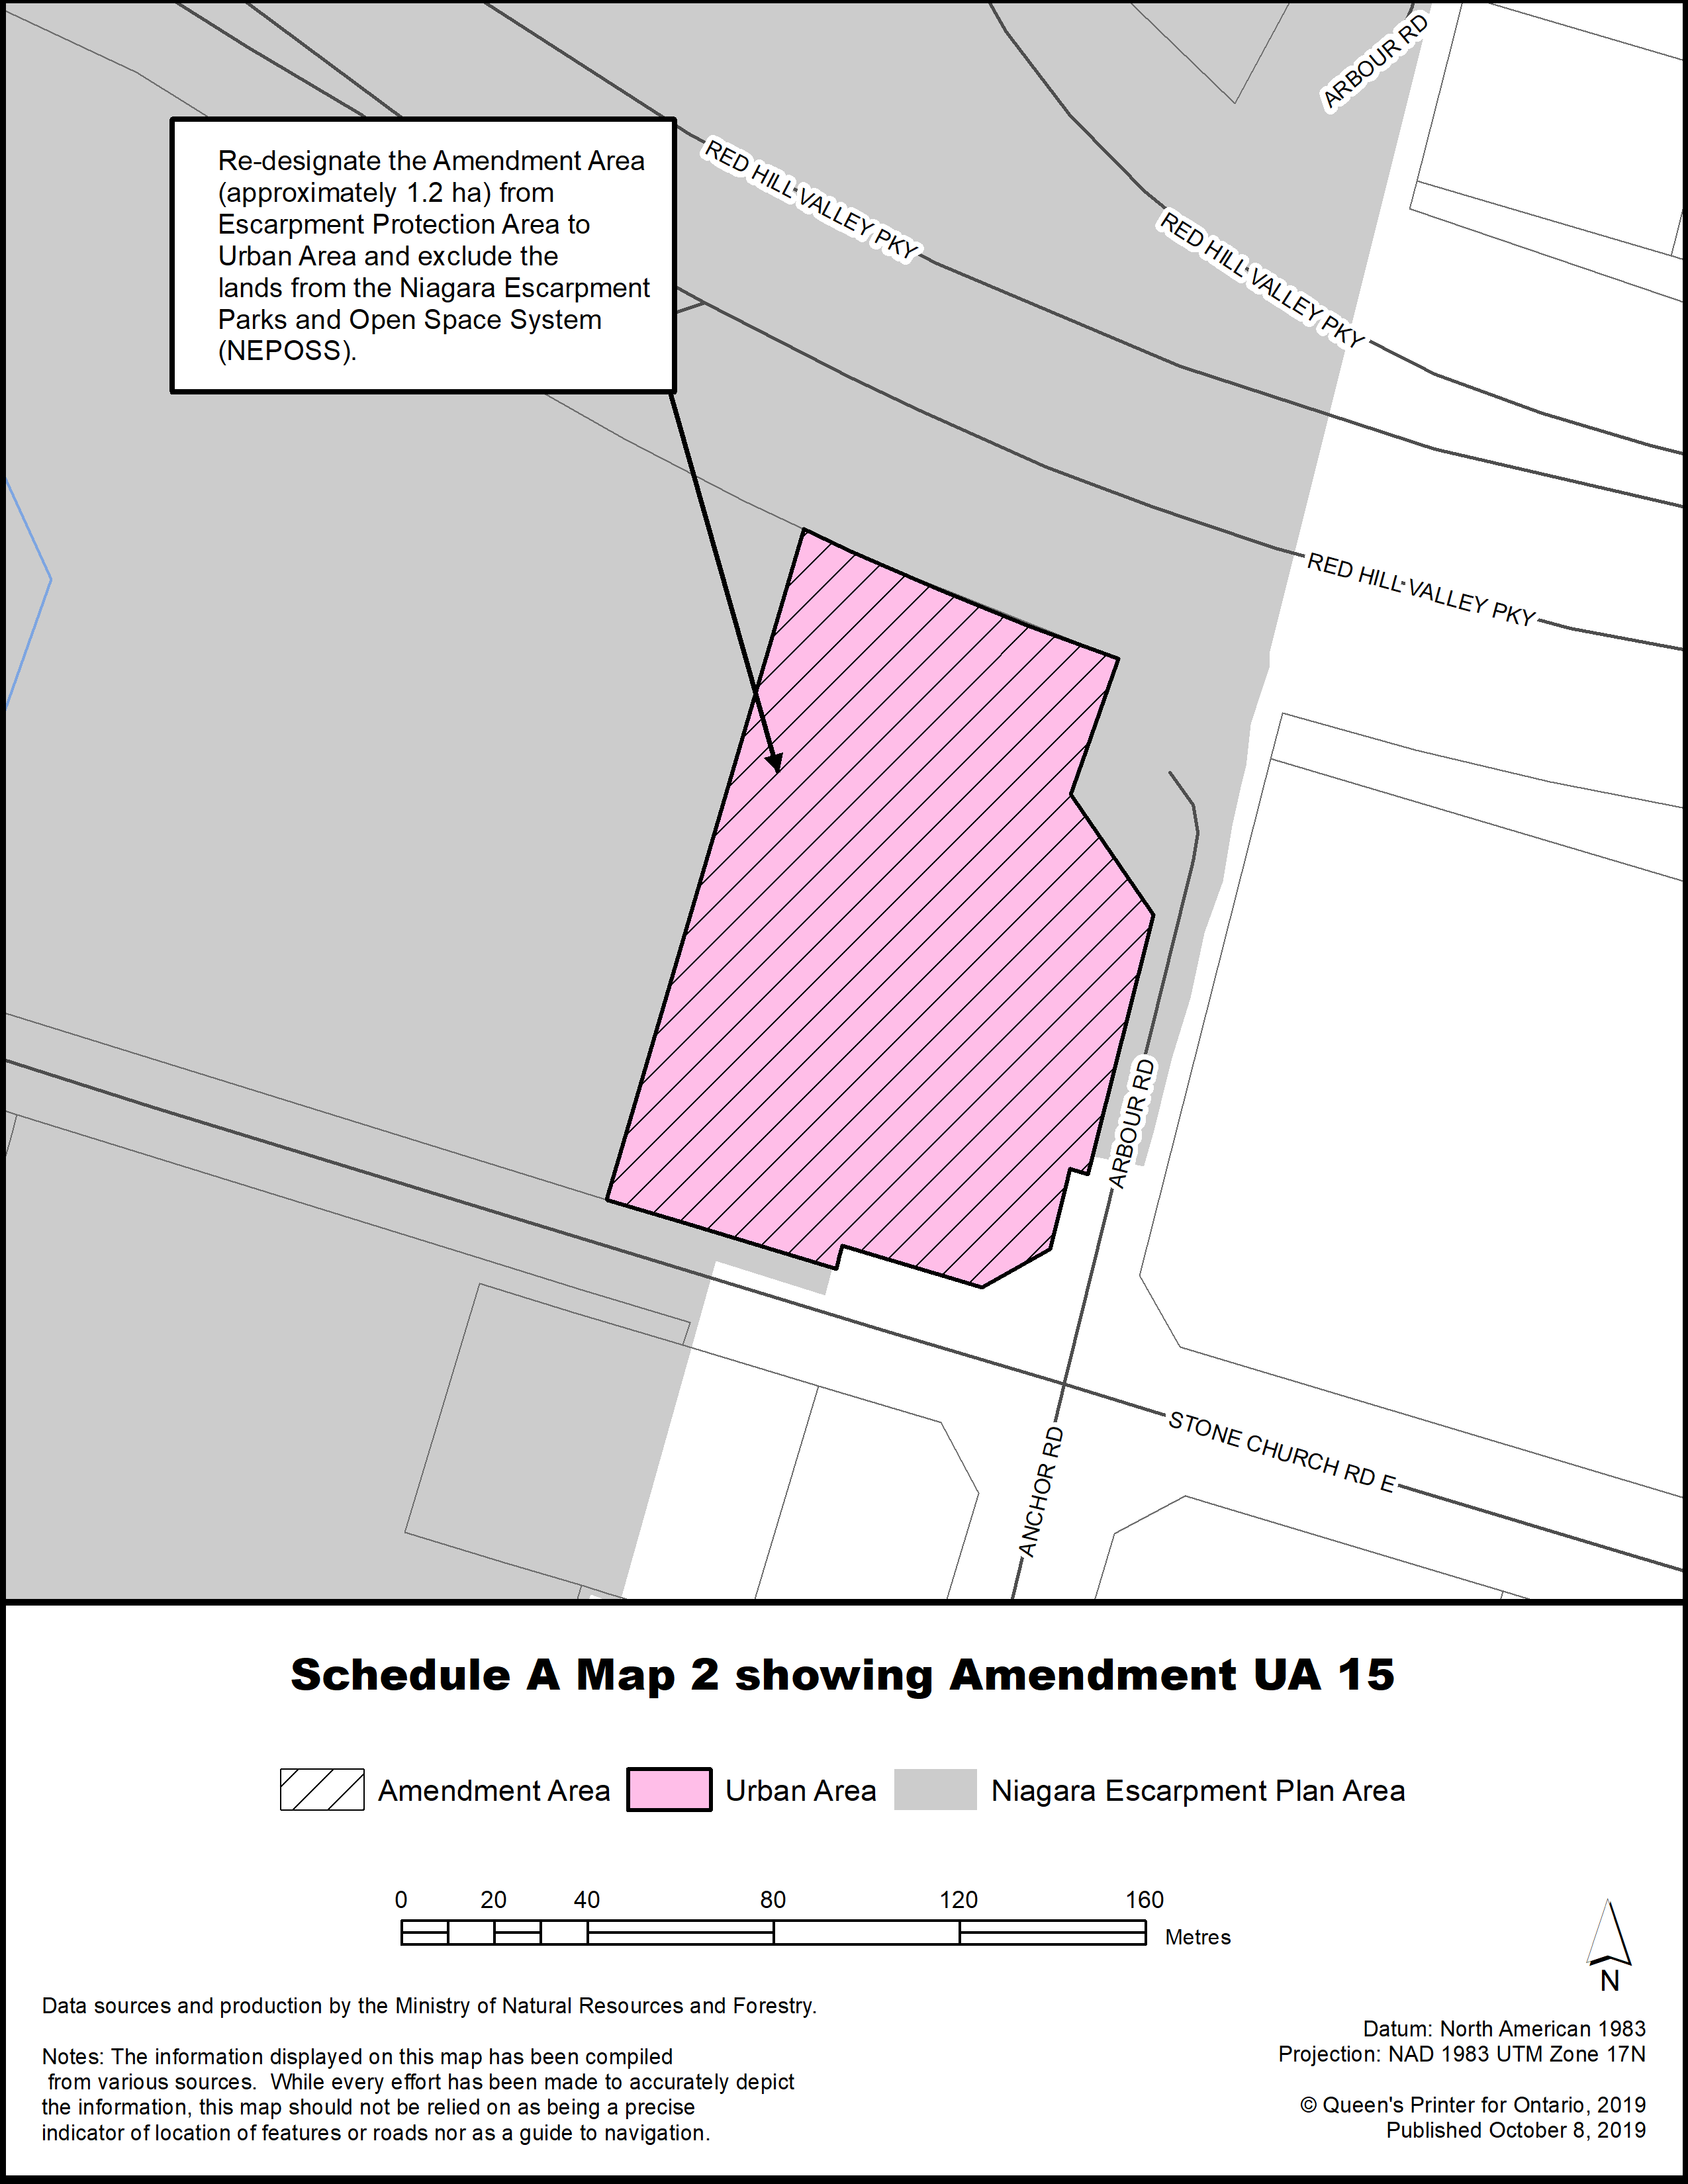 Schedule A Map 2 showing Amendment UA 15.
Re-designate the Amendment Area (approximately 1.2 ha) from Escarpment Protection Area to Urban Area and exclude the lands from the Niagara Escarpment Parks and Open Space System.